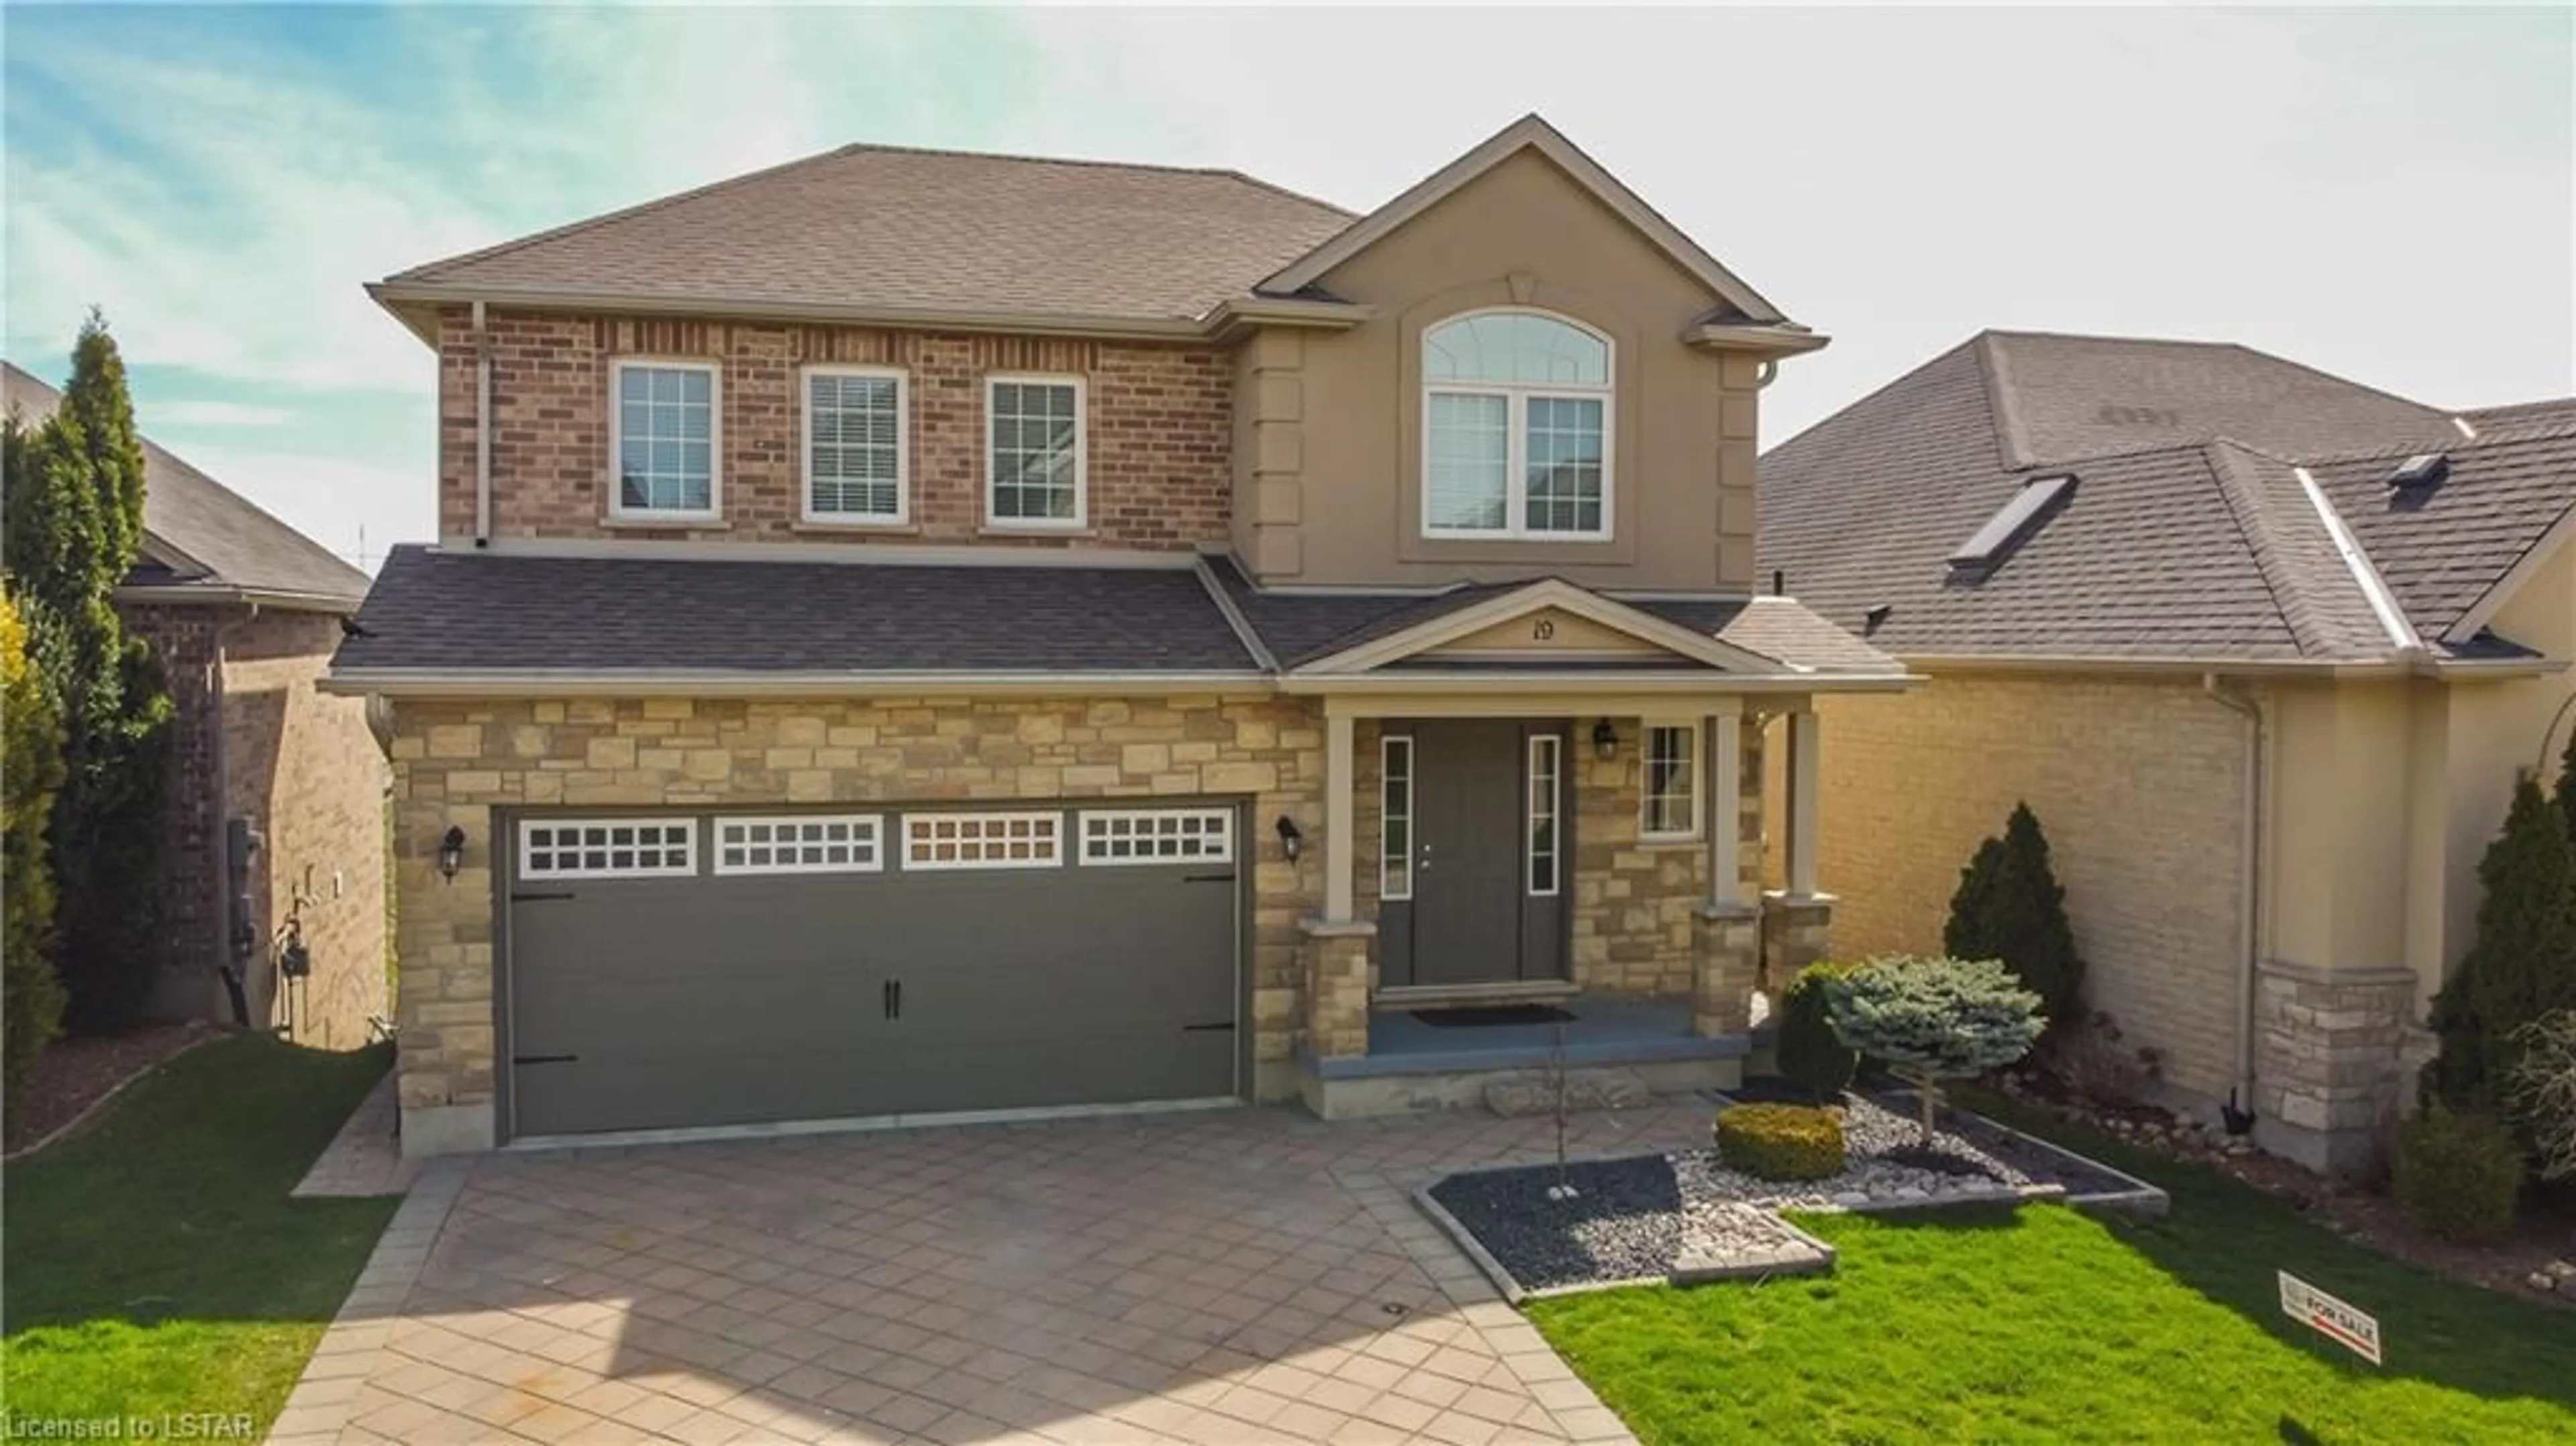 Home with brick exterior material for 2615 Colonel Talbot Rd #19, London Ontario N6K 5B4